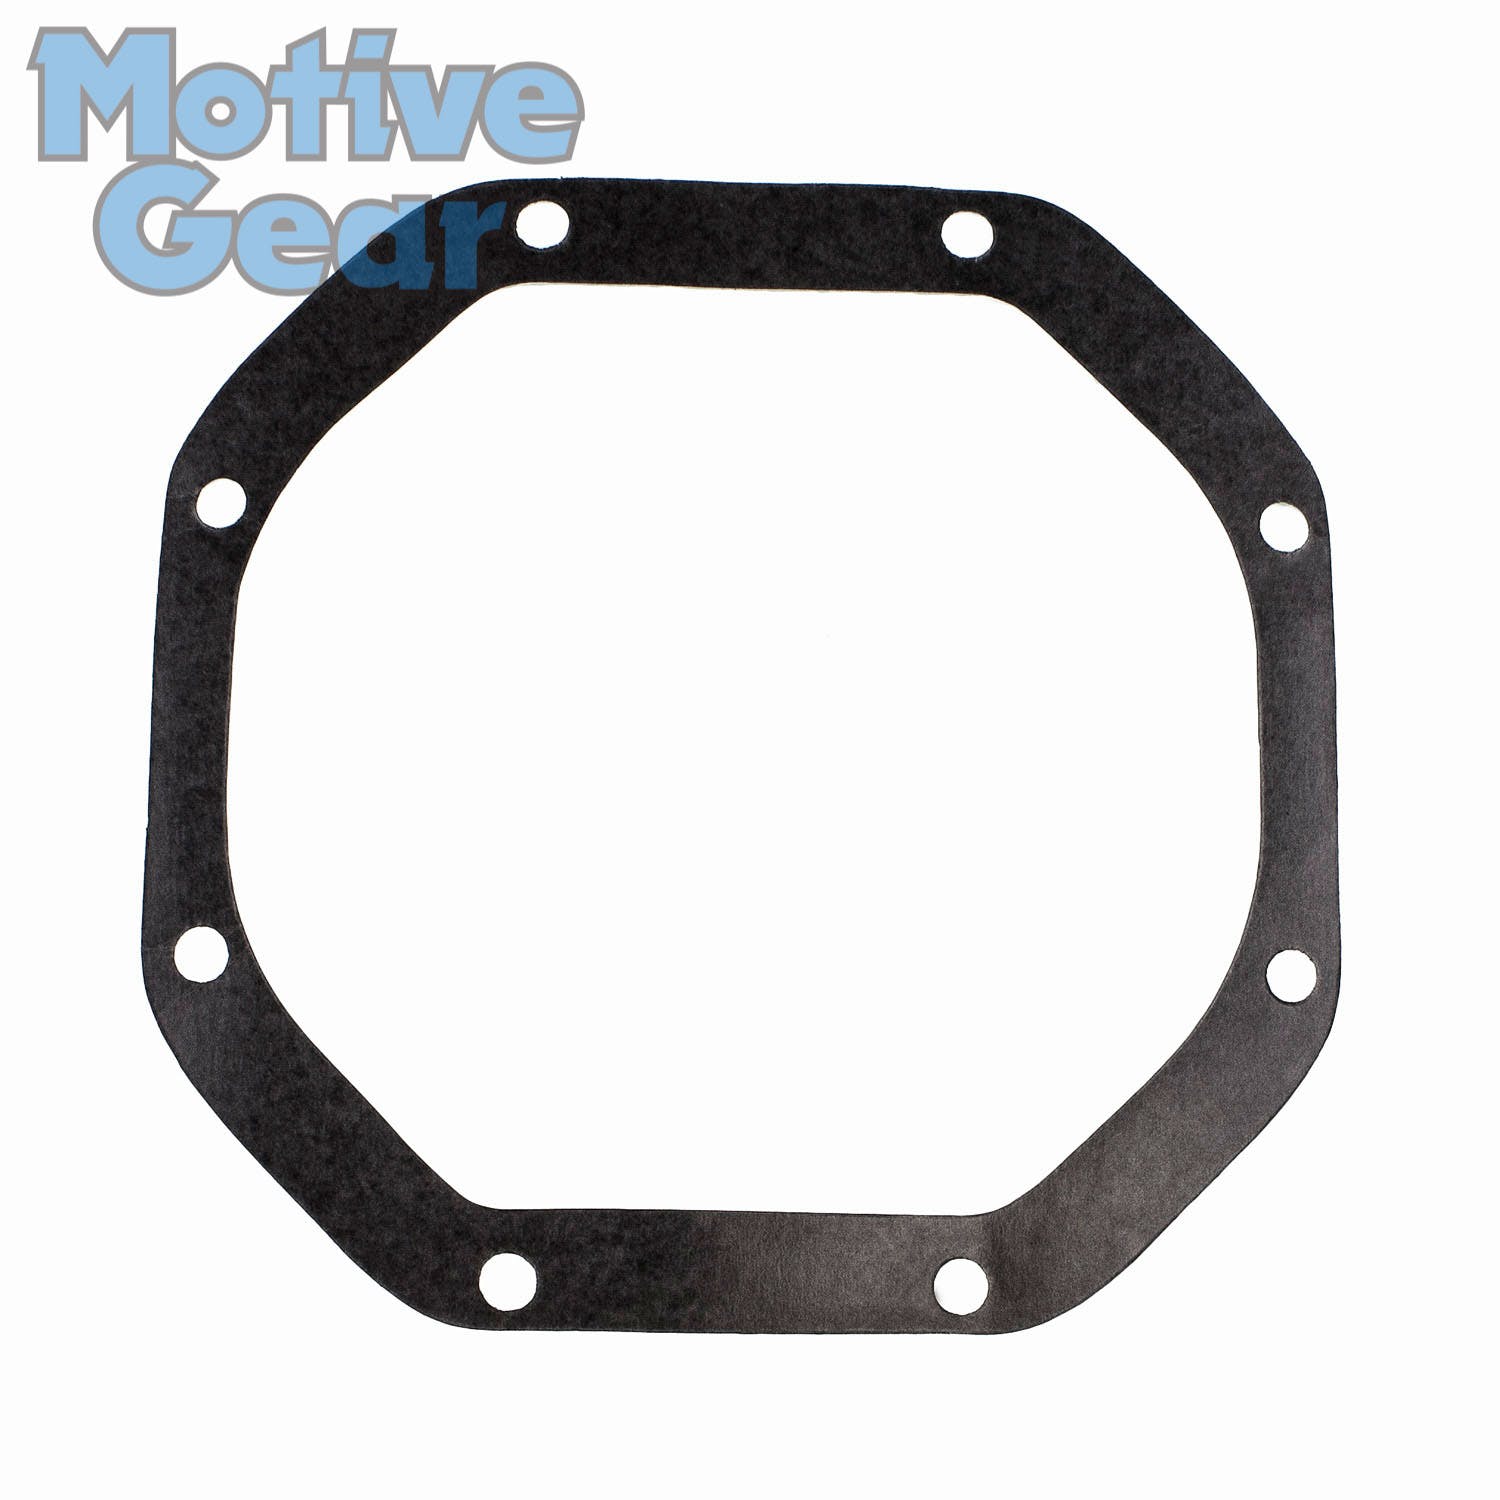 Motive Gear 5103 Differential Cover Gasket